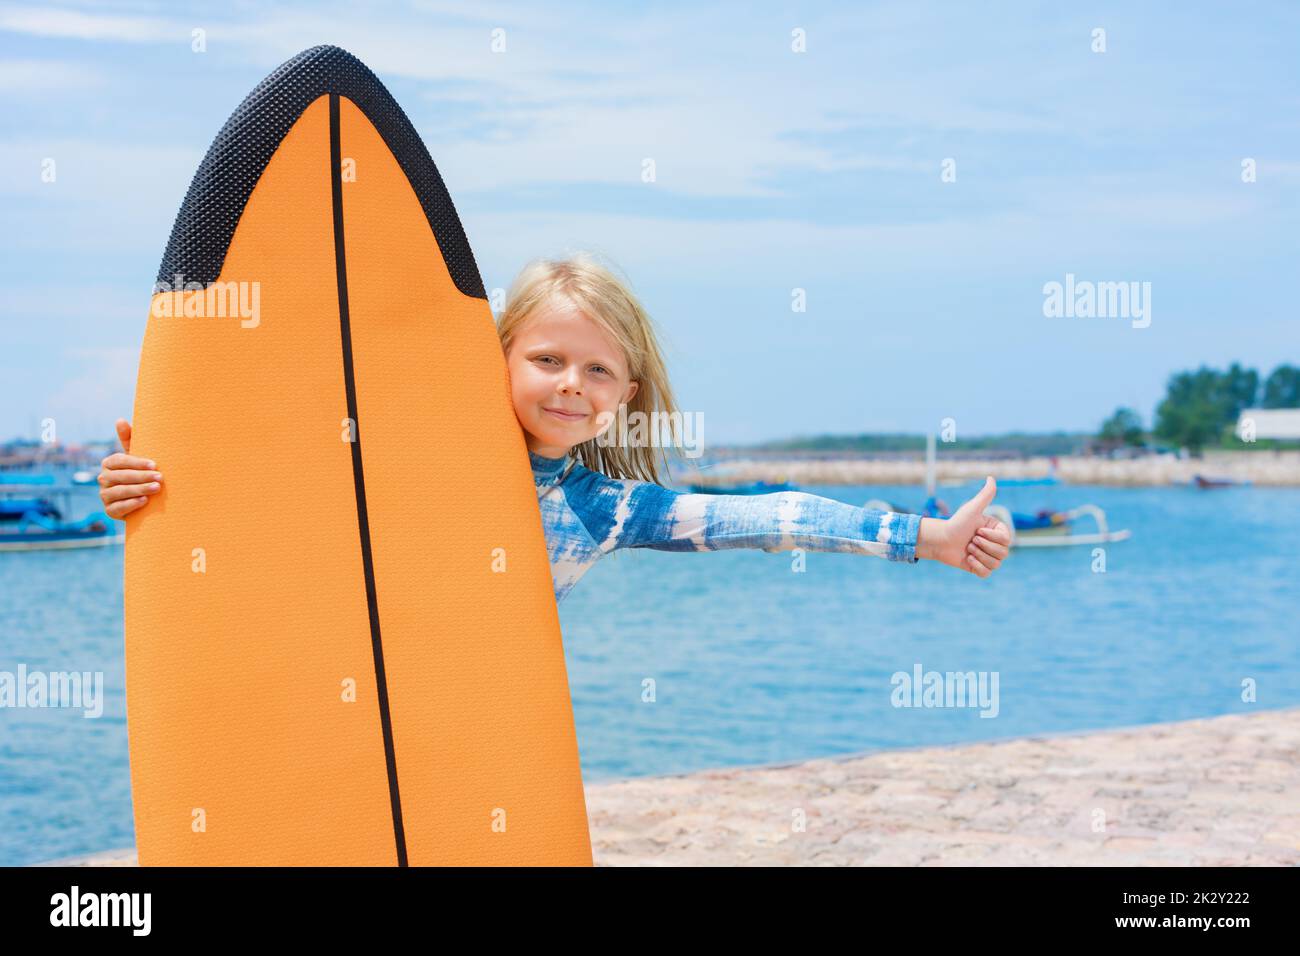 Happy baby girl - young surfer learn to ride on surfboard with fun on sea waves. Active family lifestyle, kids outdoor water sport lessons, surfing Stock Photo